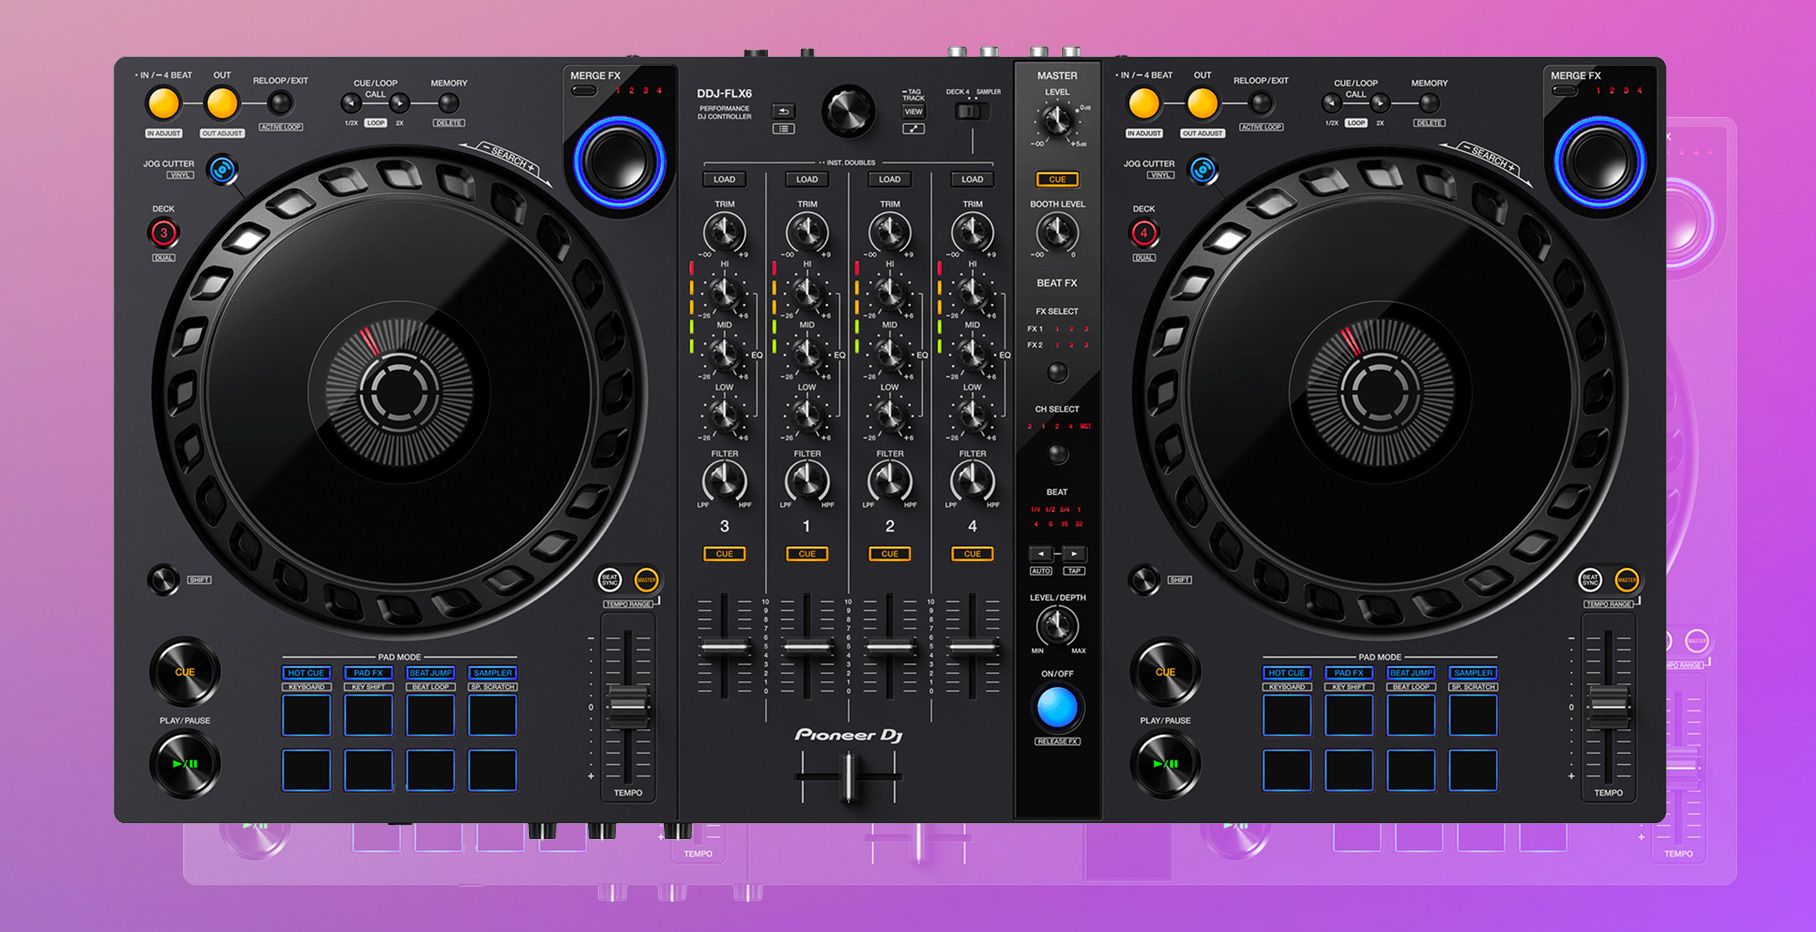 Review: DDJ-FLX6 – a feature-packed, midrange controller for $599 